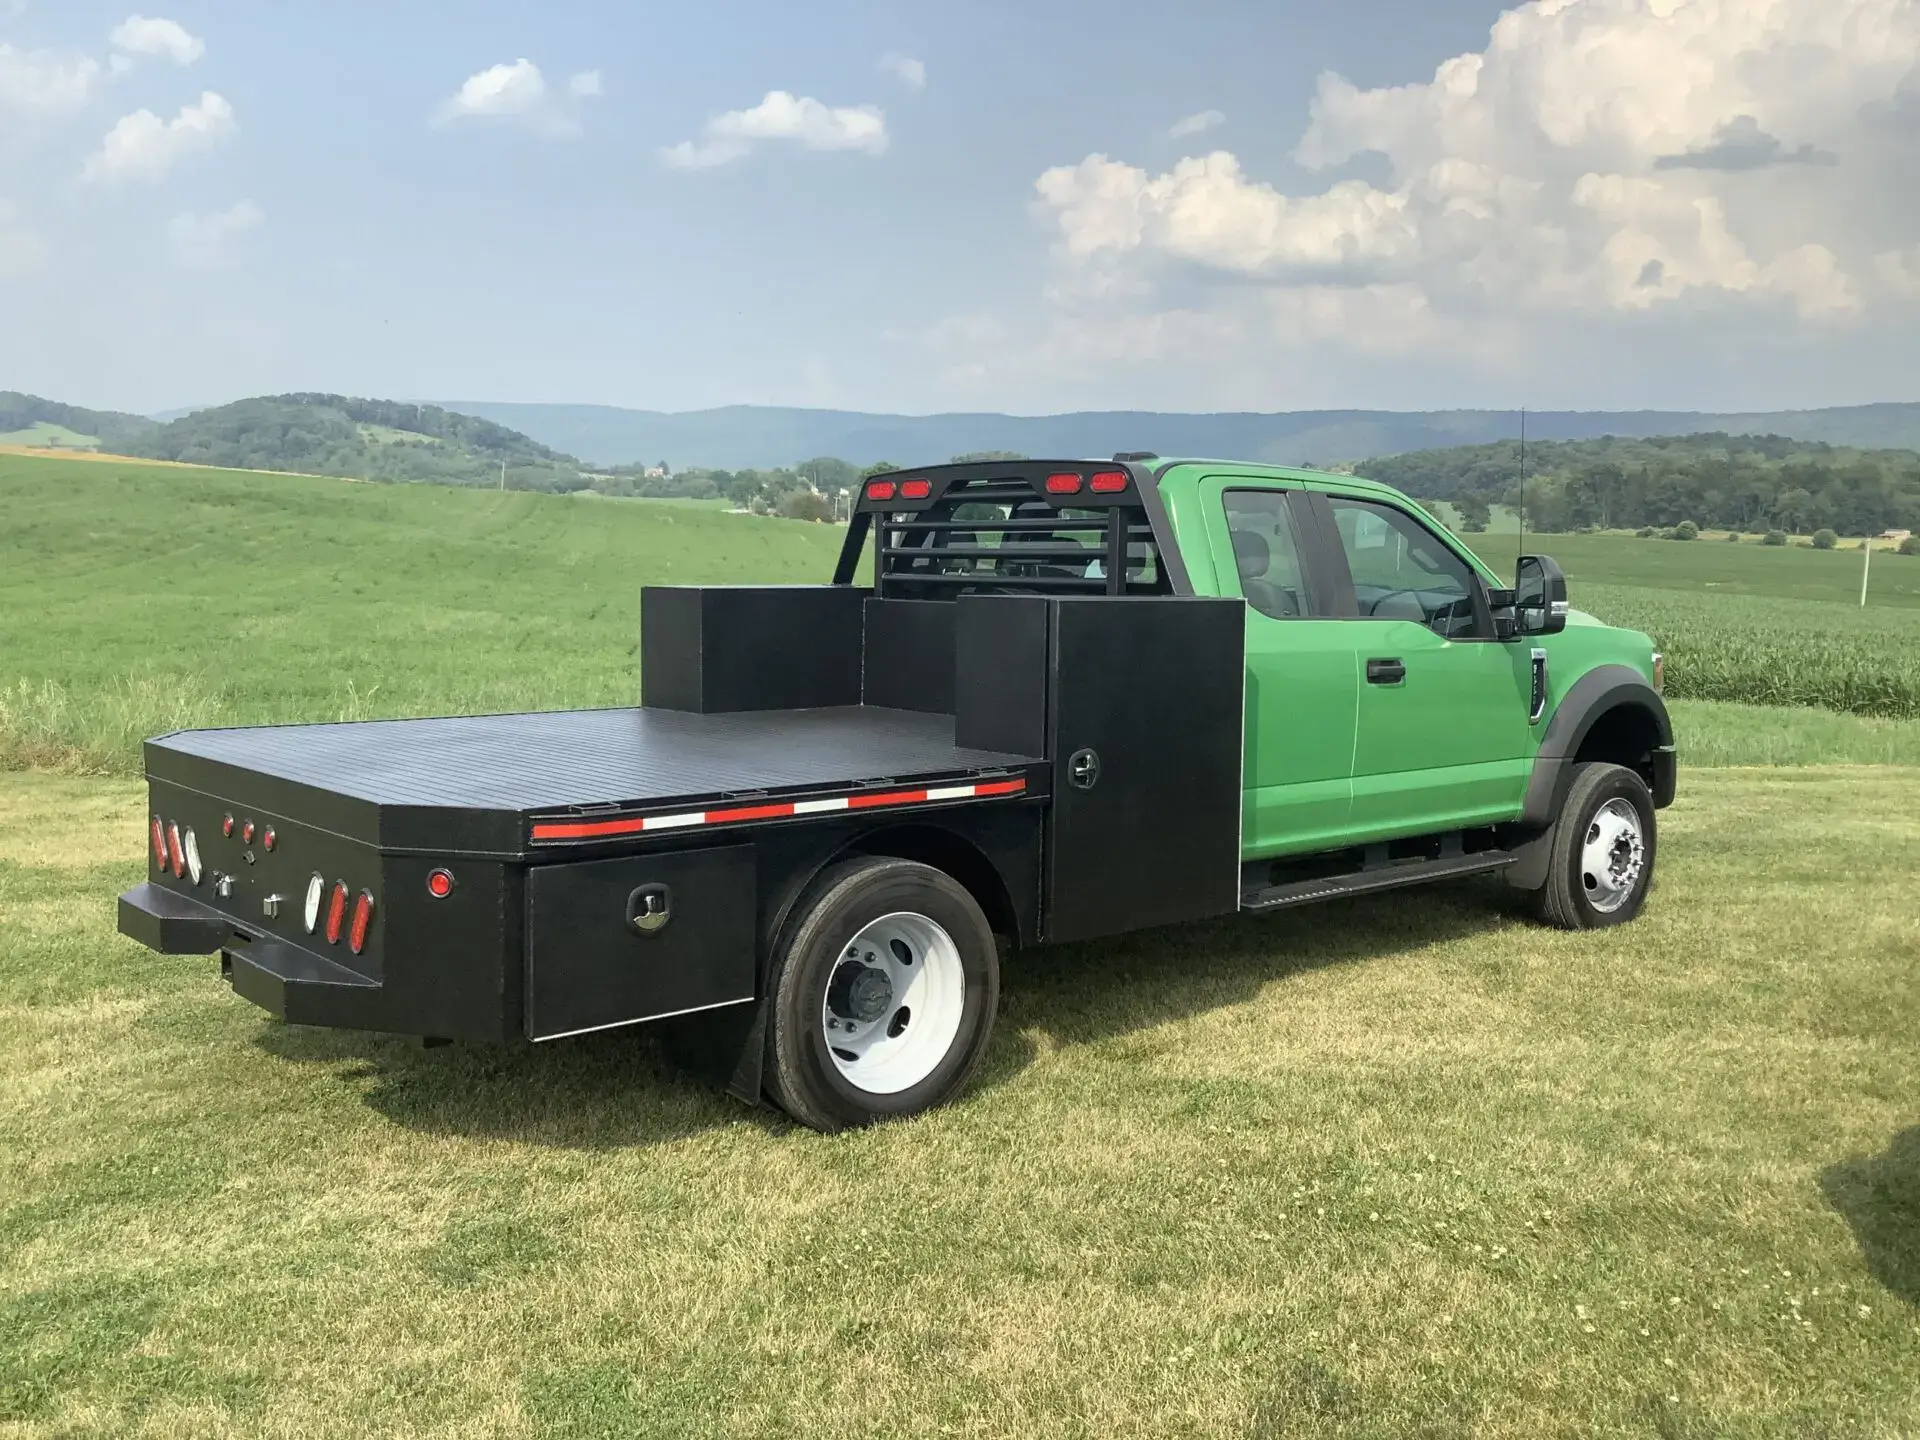 Apple green pickup truck with a black trailer attachment at the back